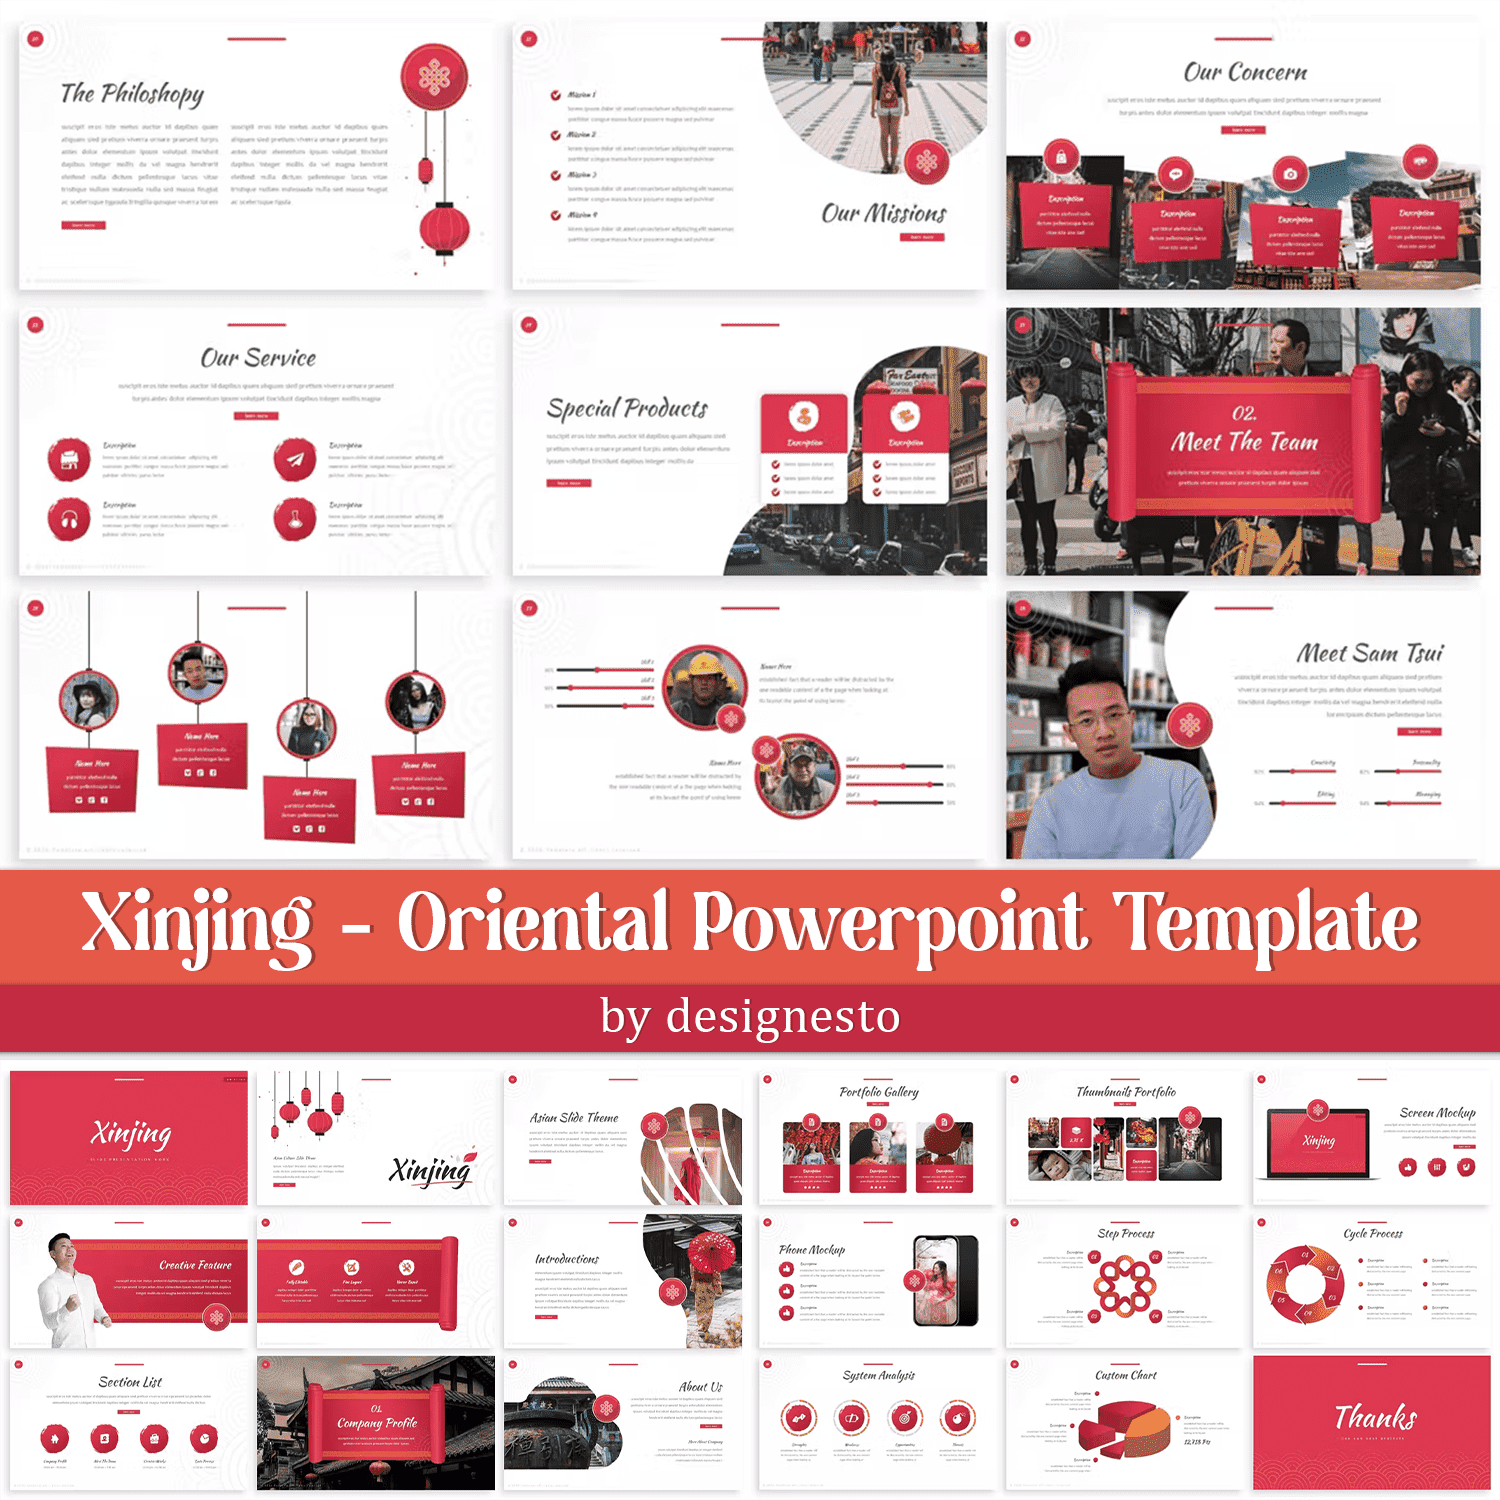 Second picture Xinjing oriental powerpoint template 1500x1500.